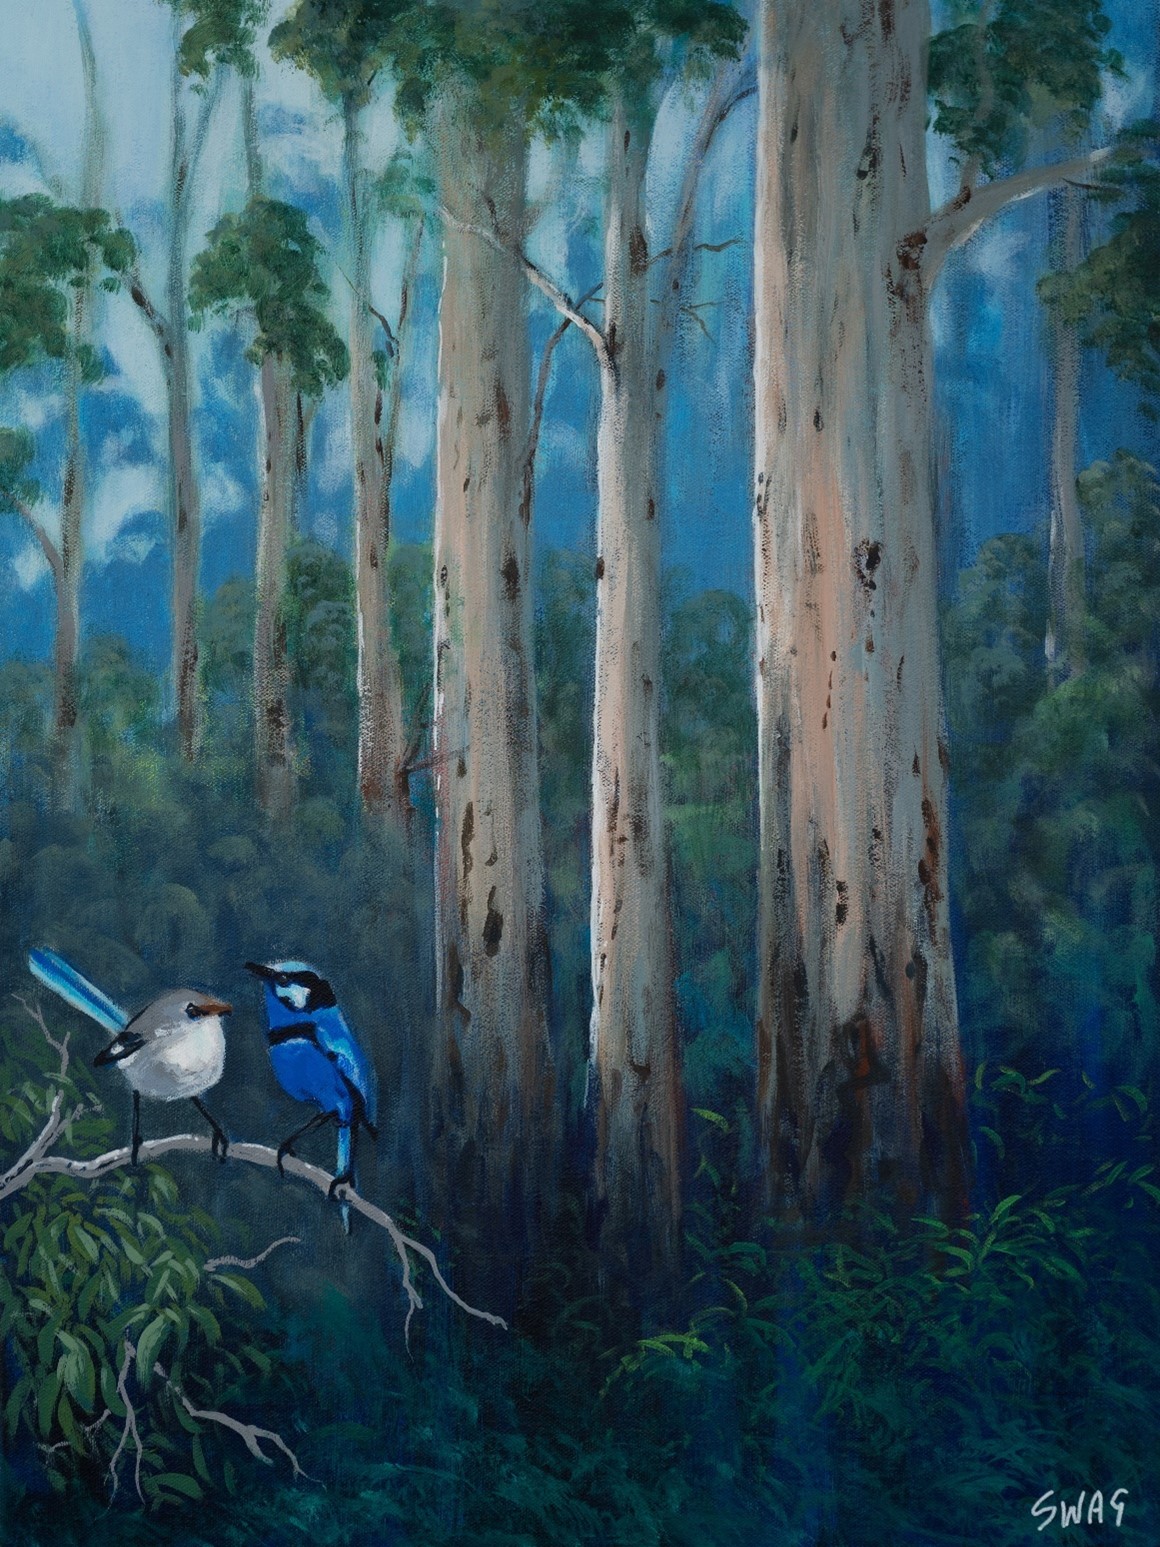 Painting of karri trees with splendid blue wren in foreground